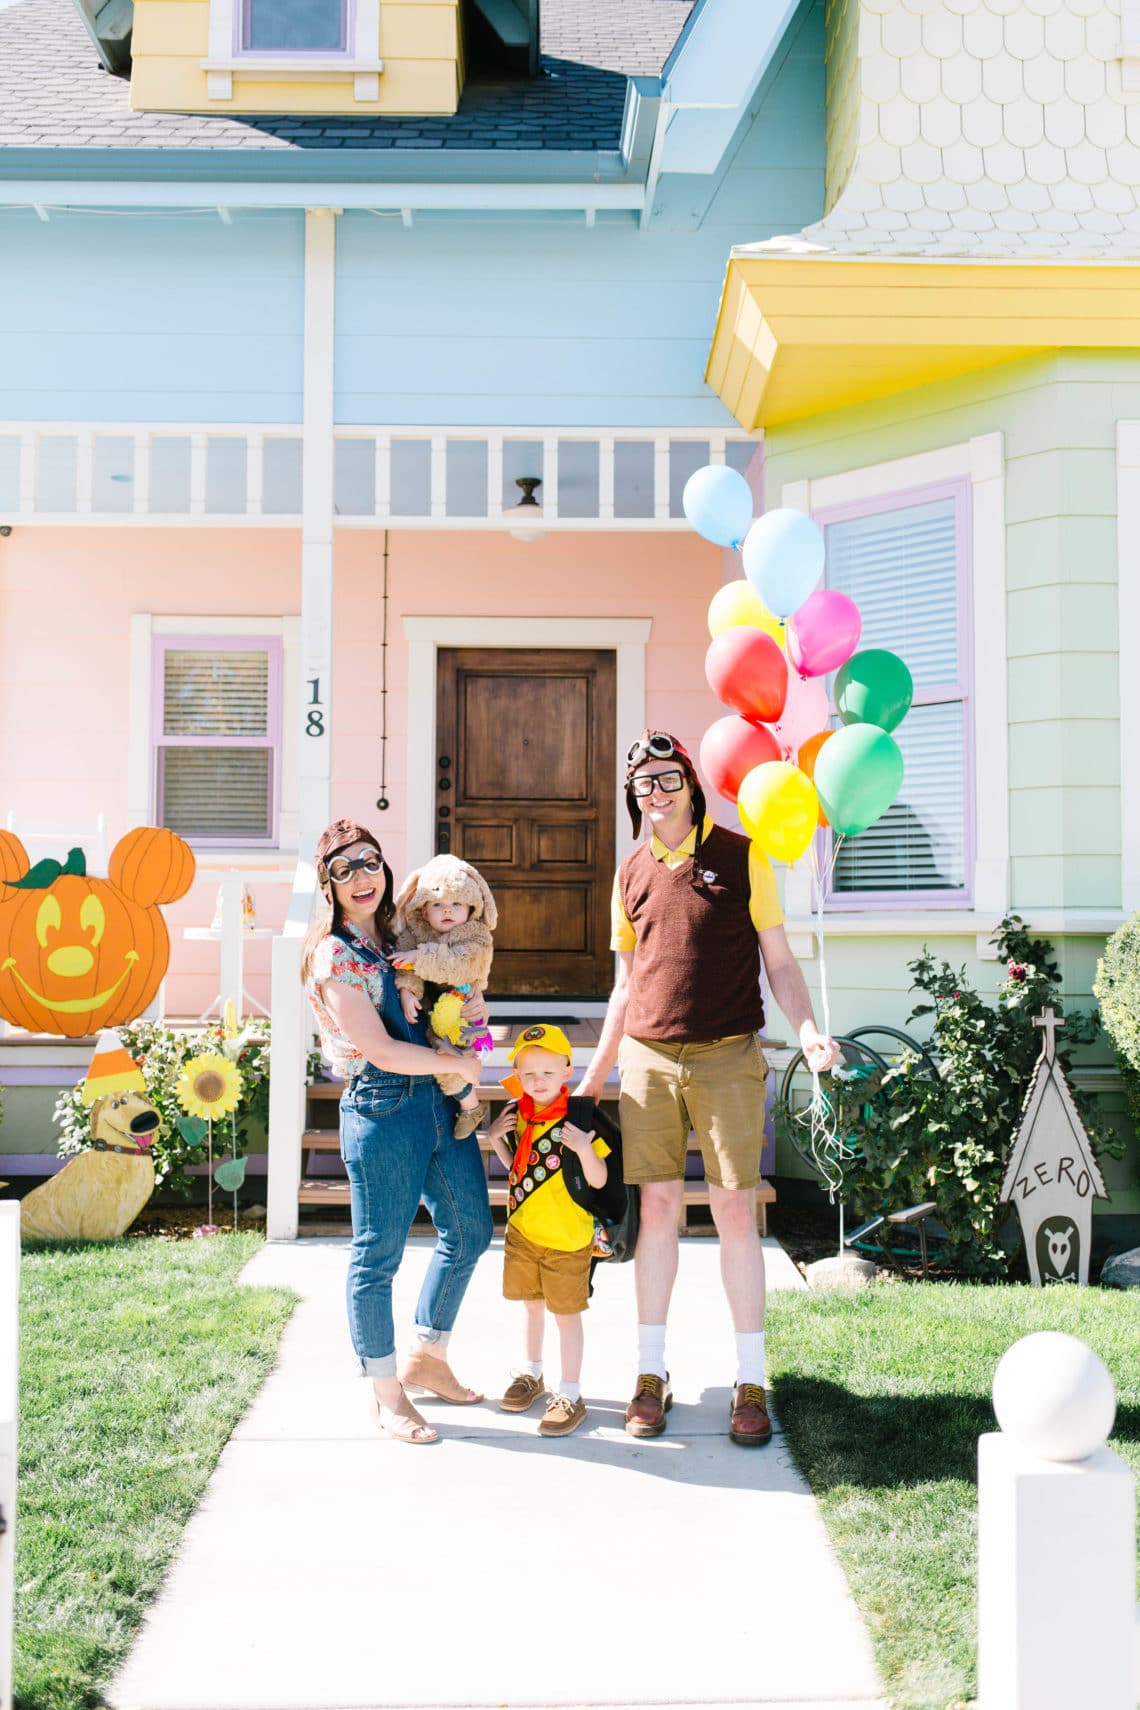 Up Costumes: From a Russell Up Costume to Carl and Ellie Costumes